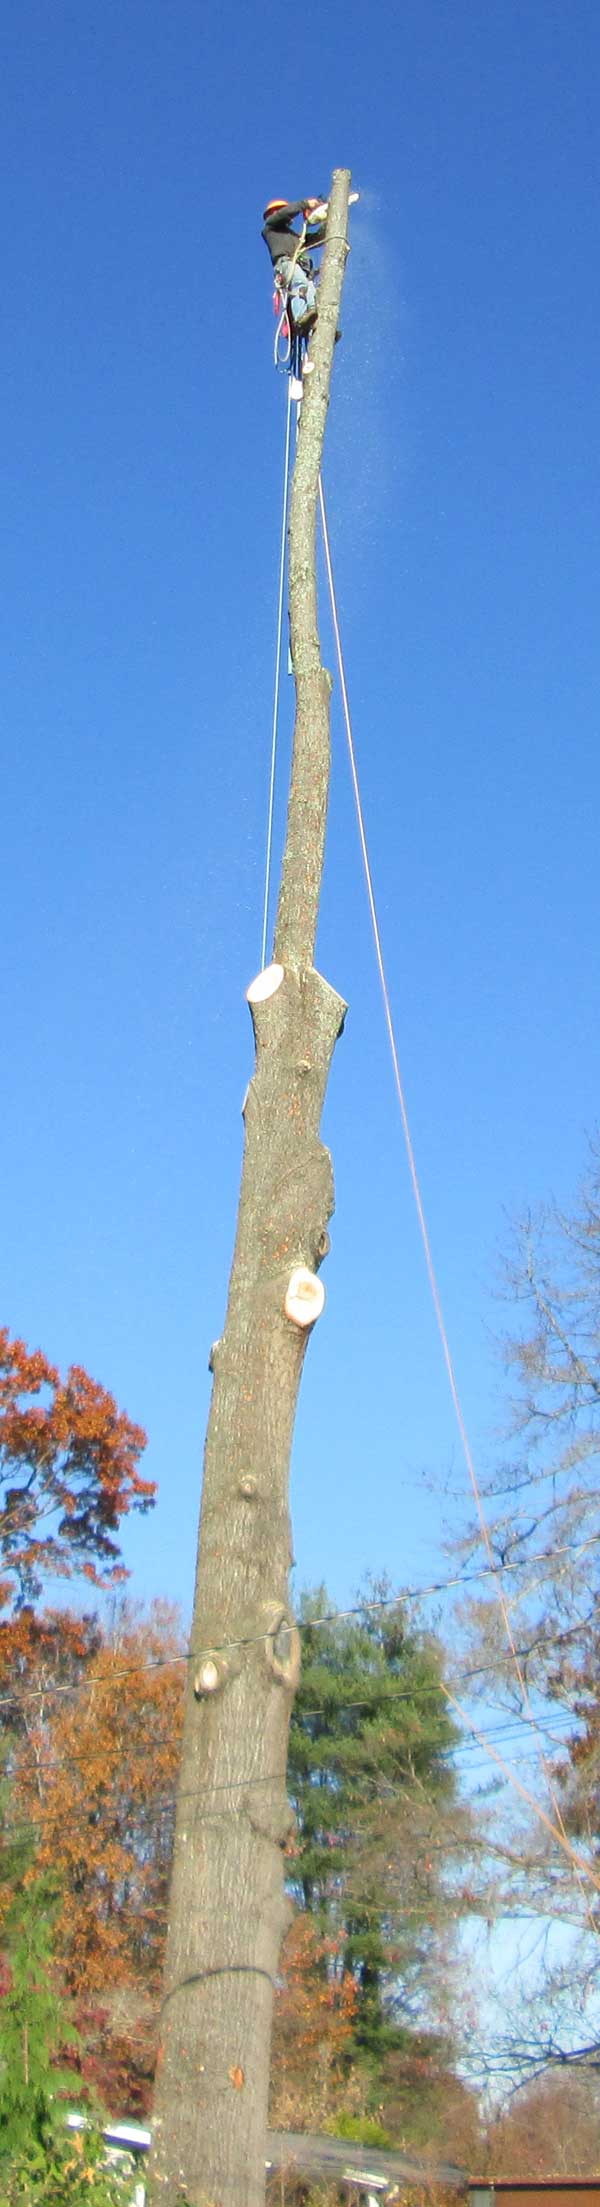 Tree removal close to home and power lines accomplished by tree climbing